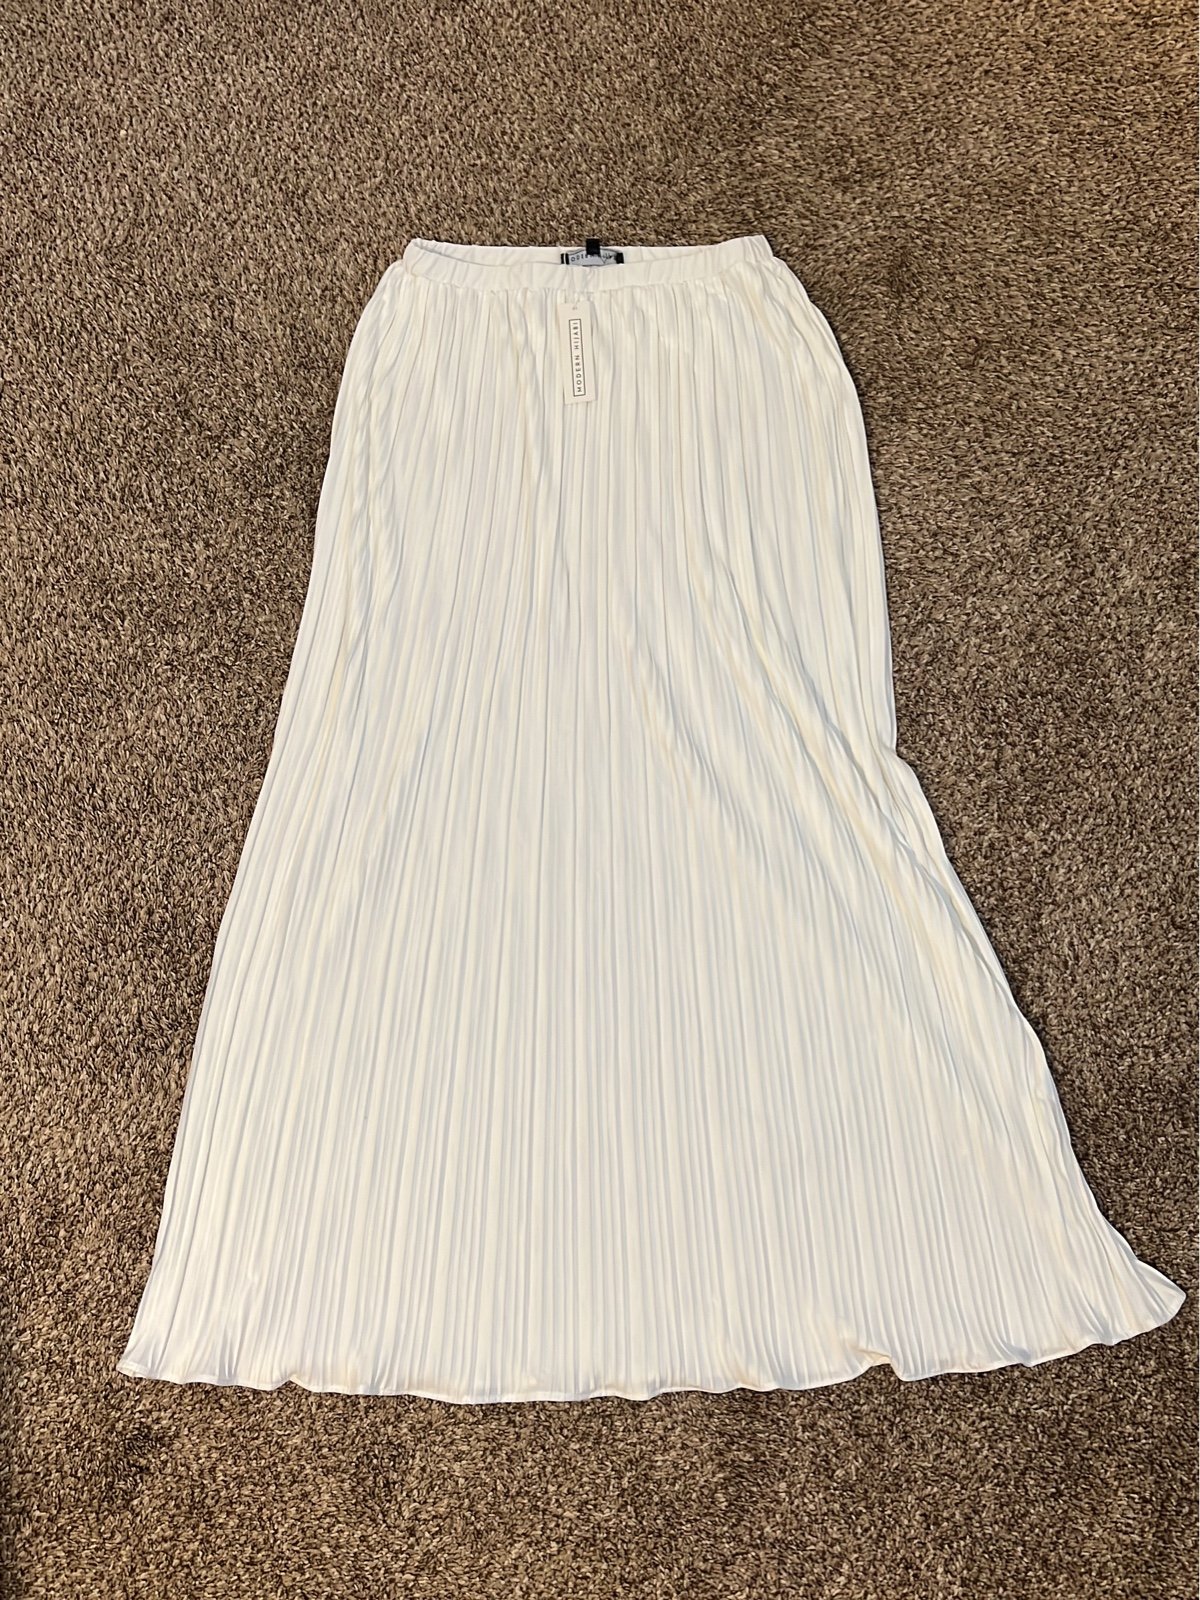 the Lowest price White Pleated Maxi Skirt Size Large K0